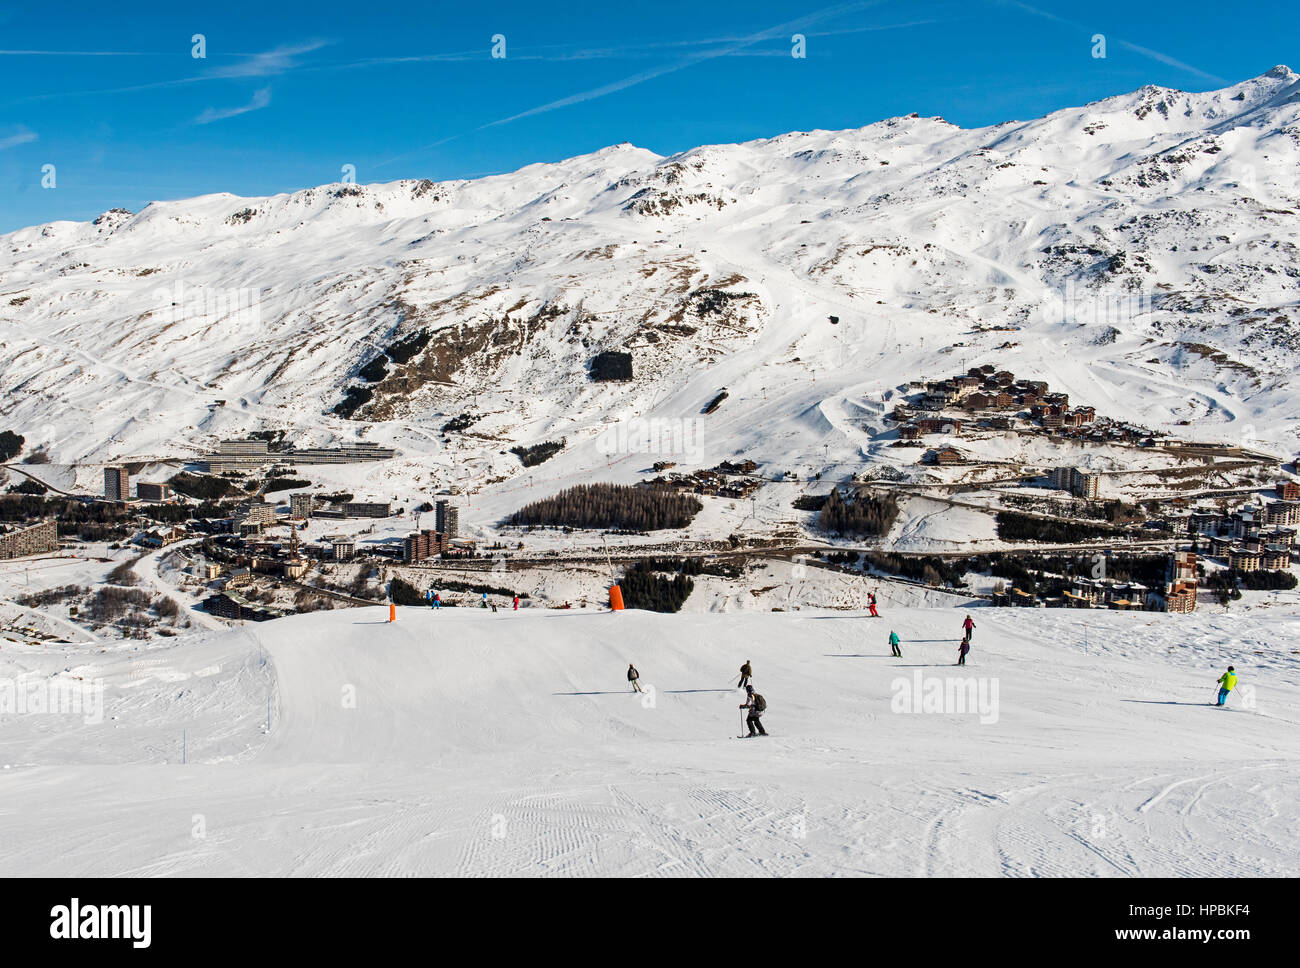 Skiers on a ski slope piste at winter alpine mountain resort with village in background Stock Photo